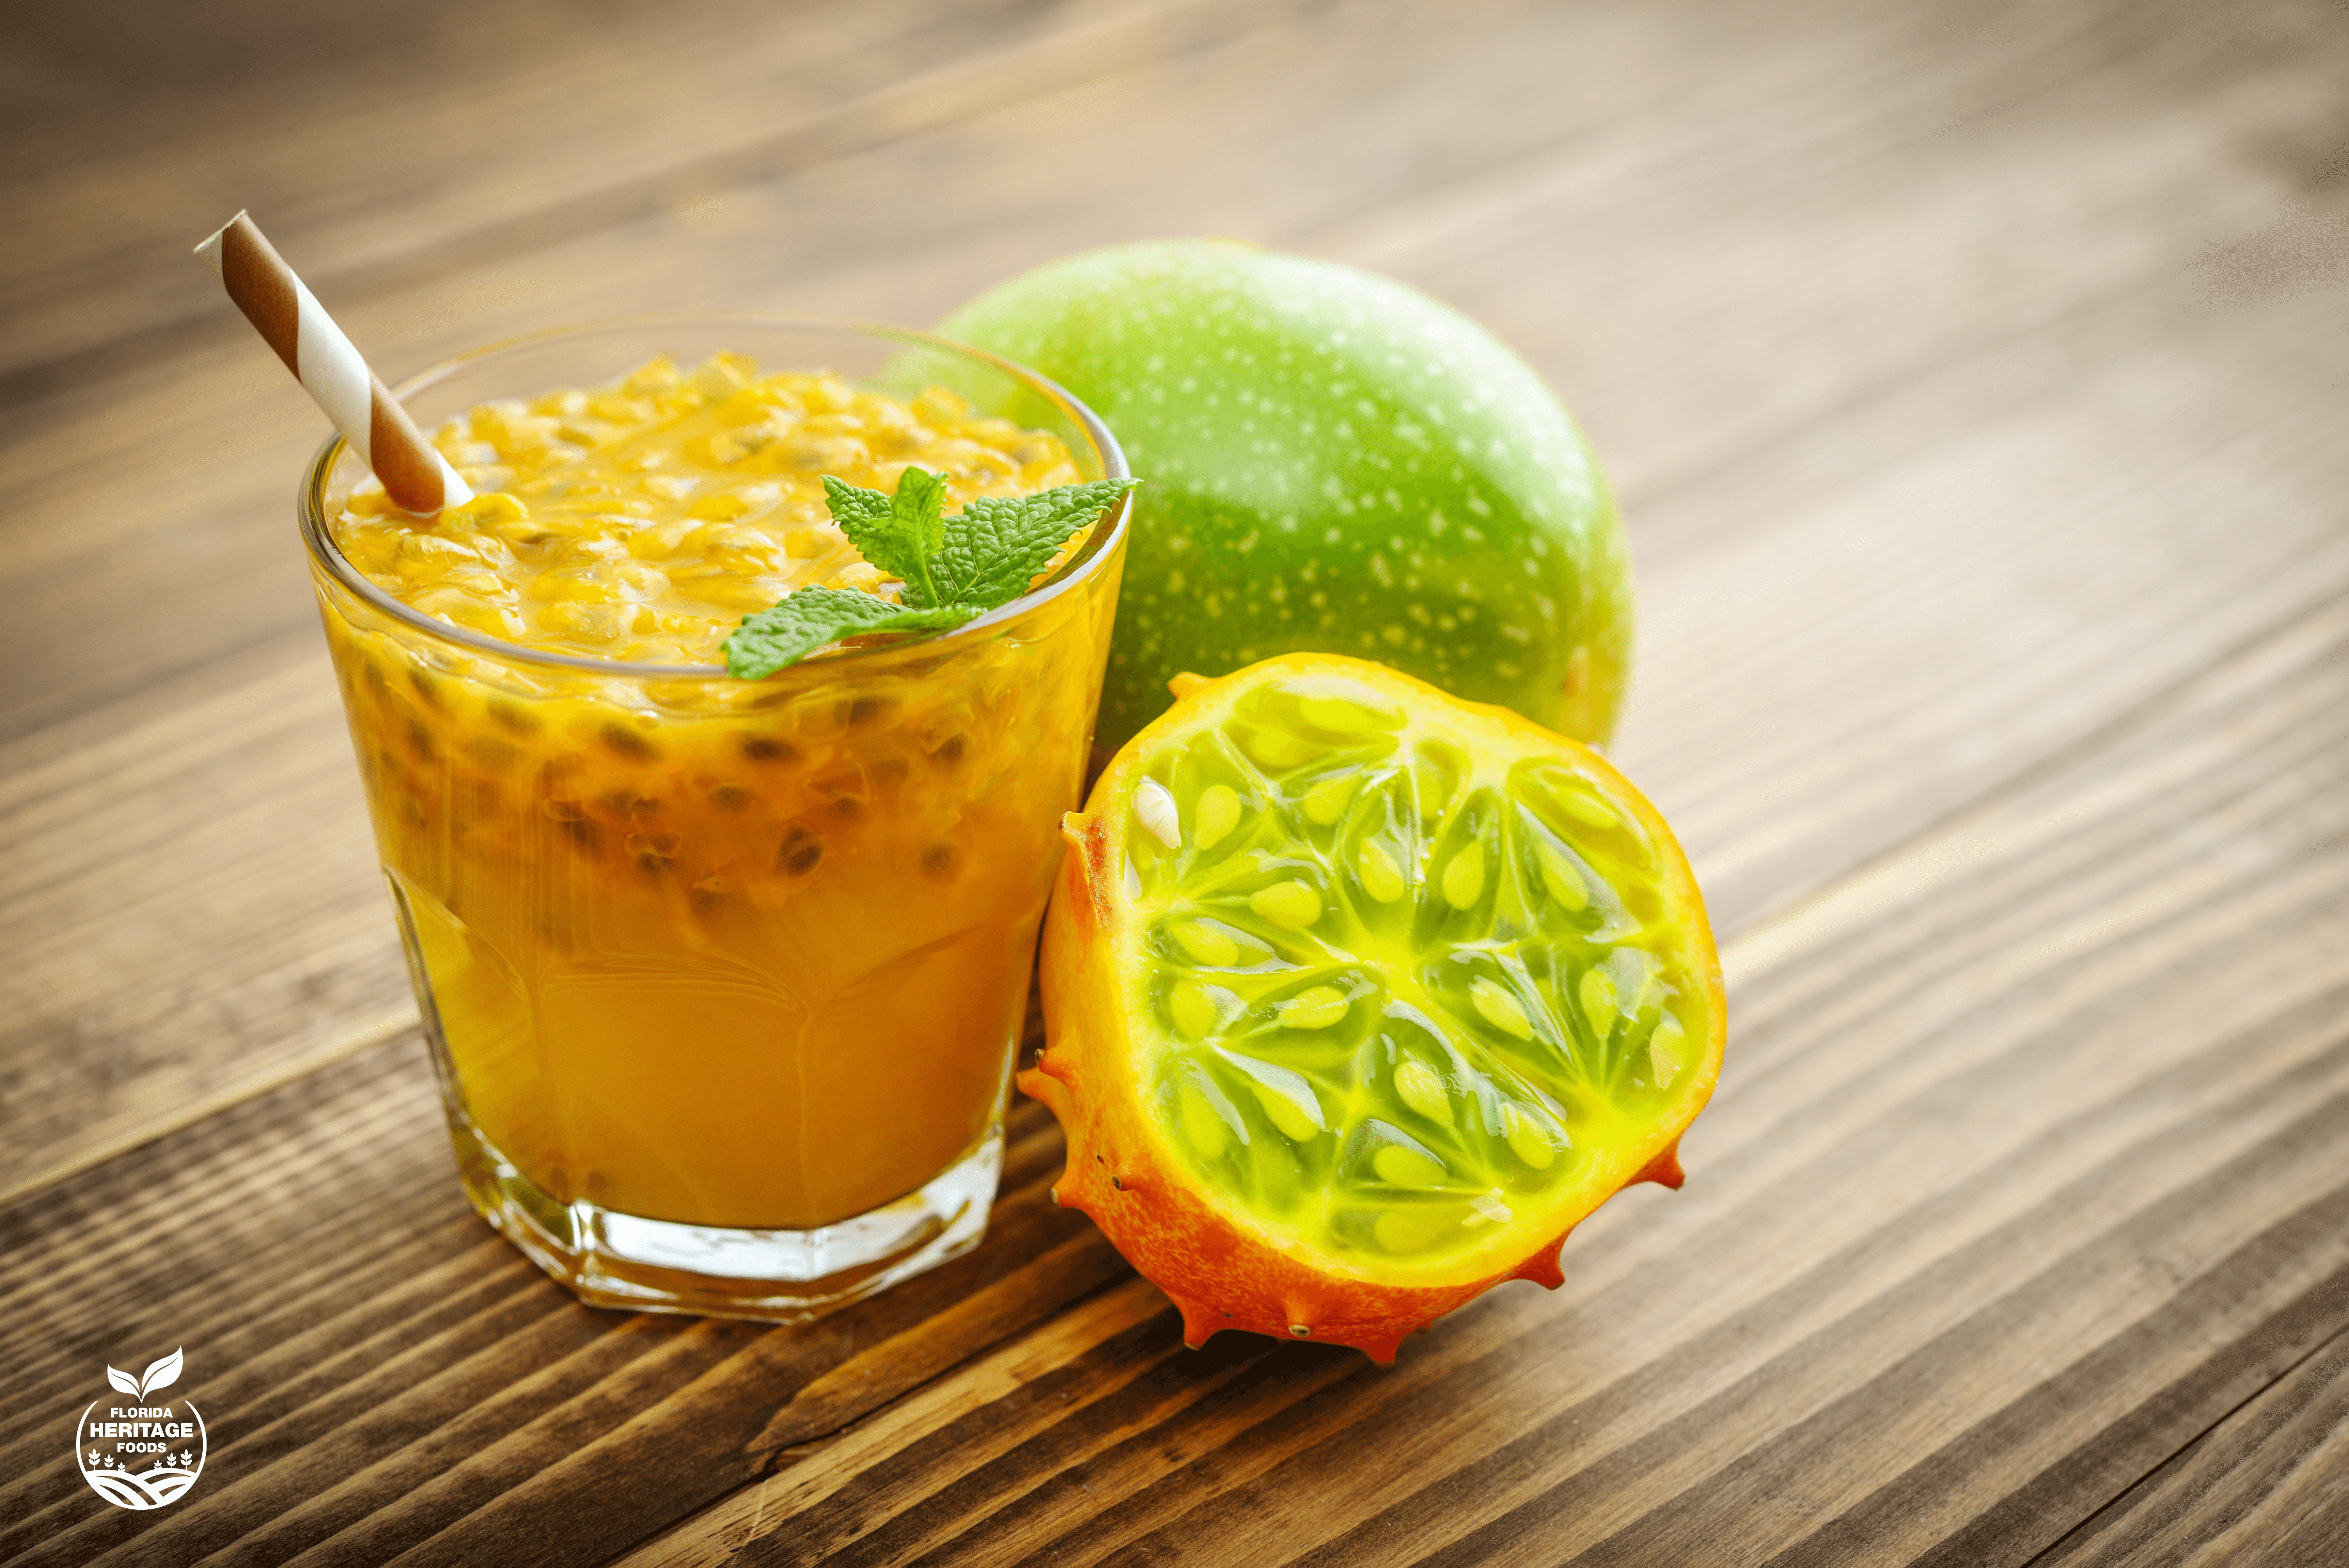 a Kiwano and passion fruit beverage